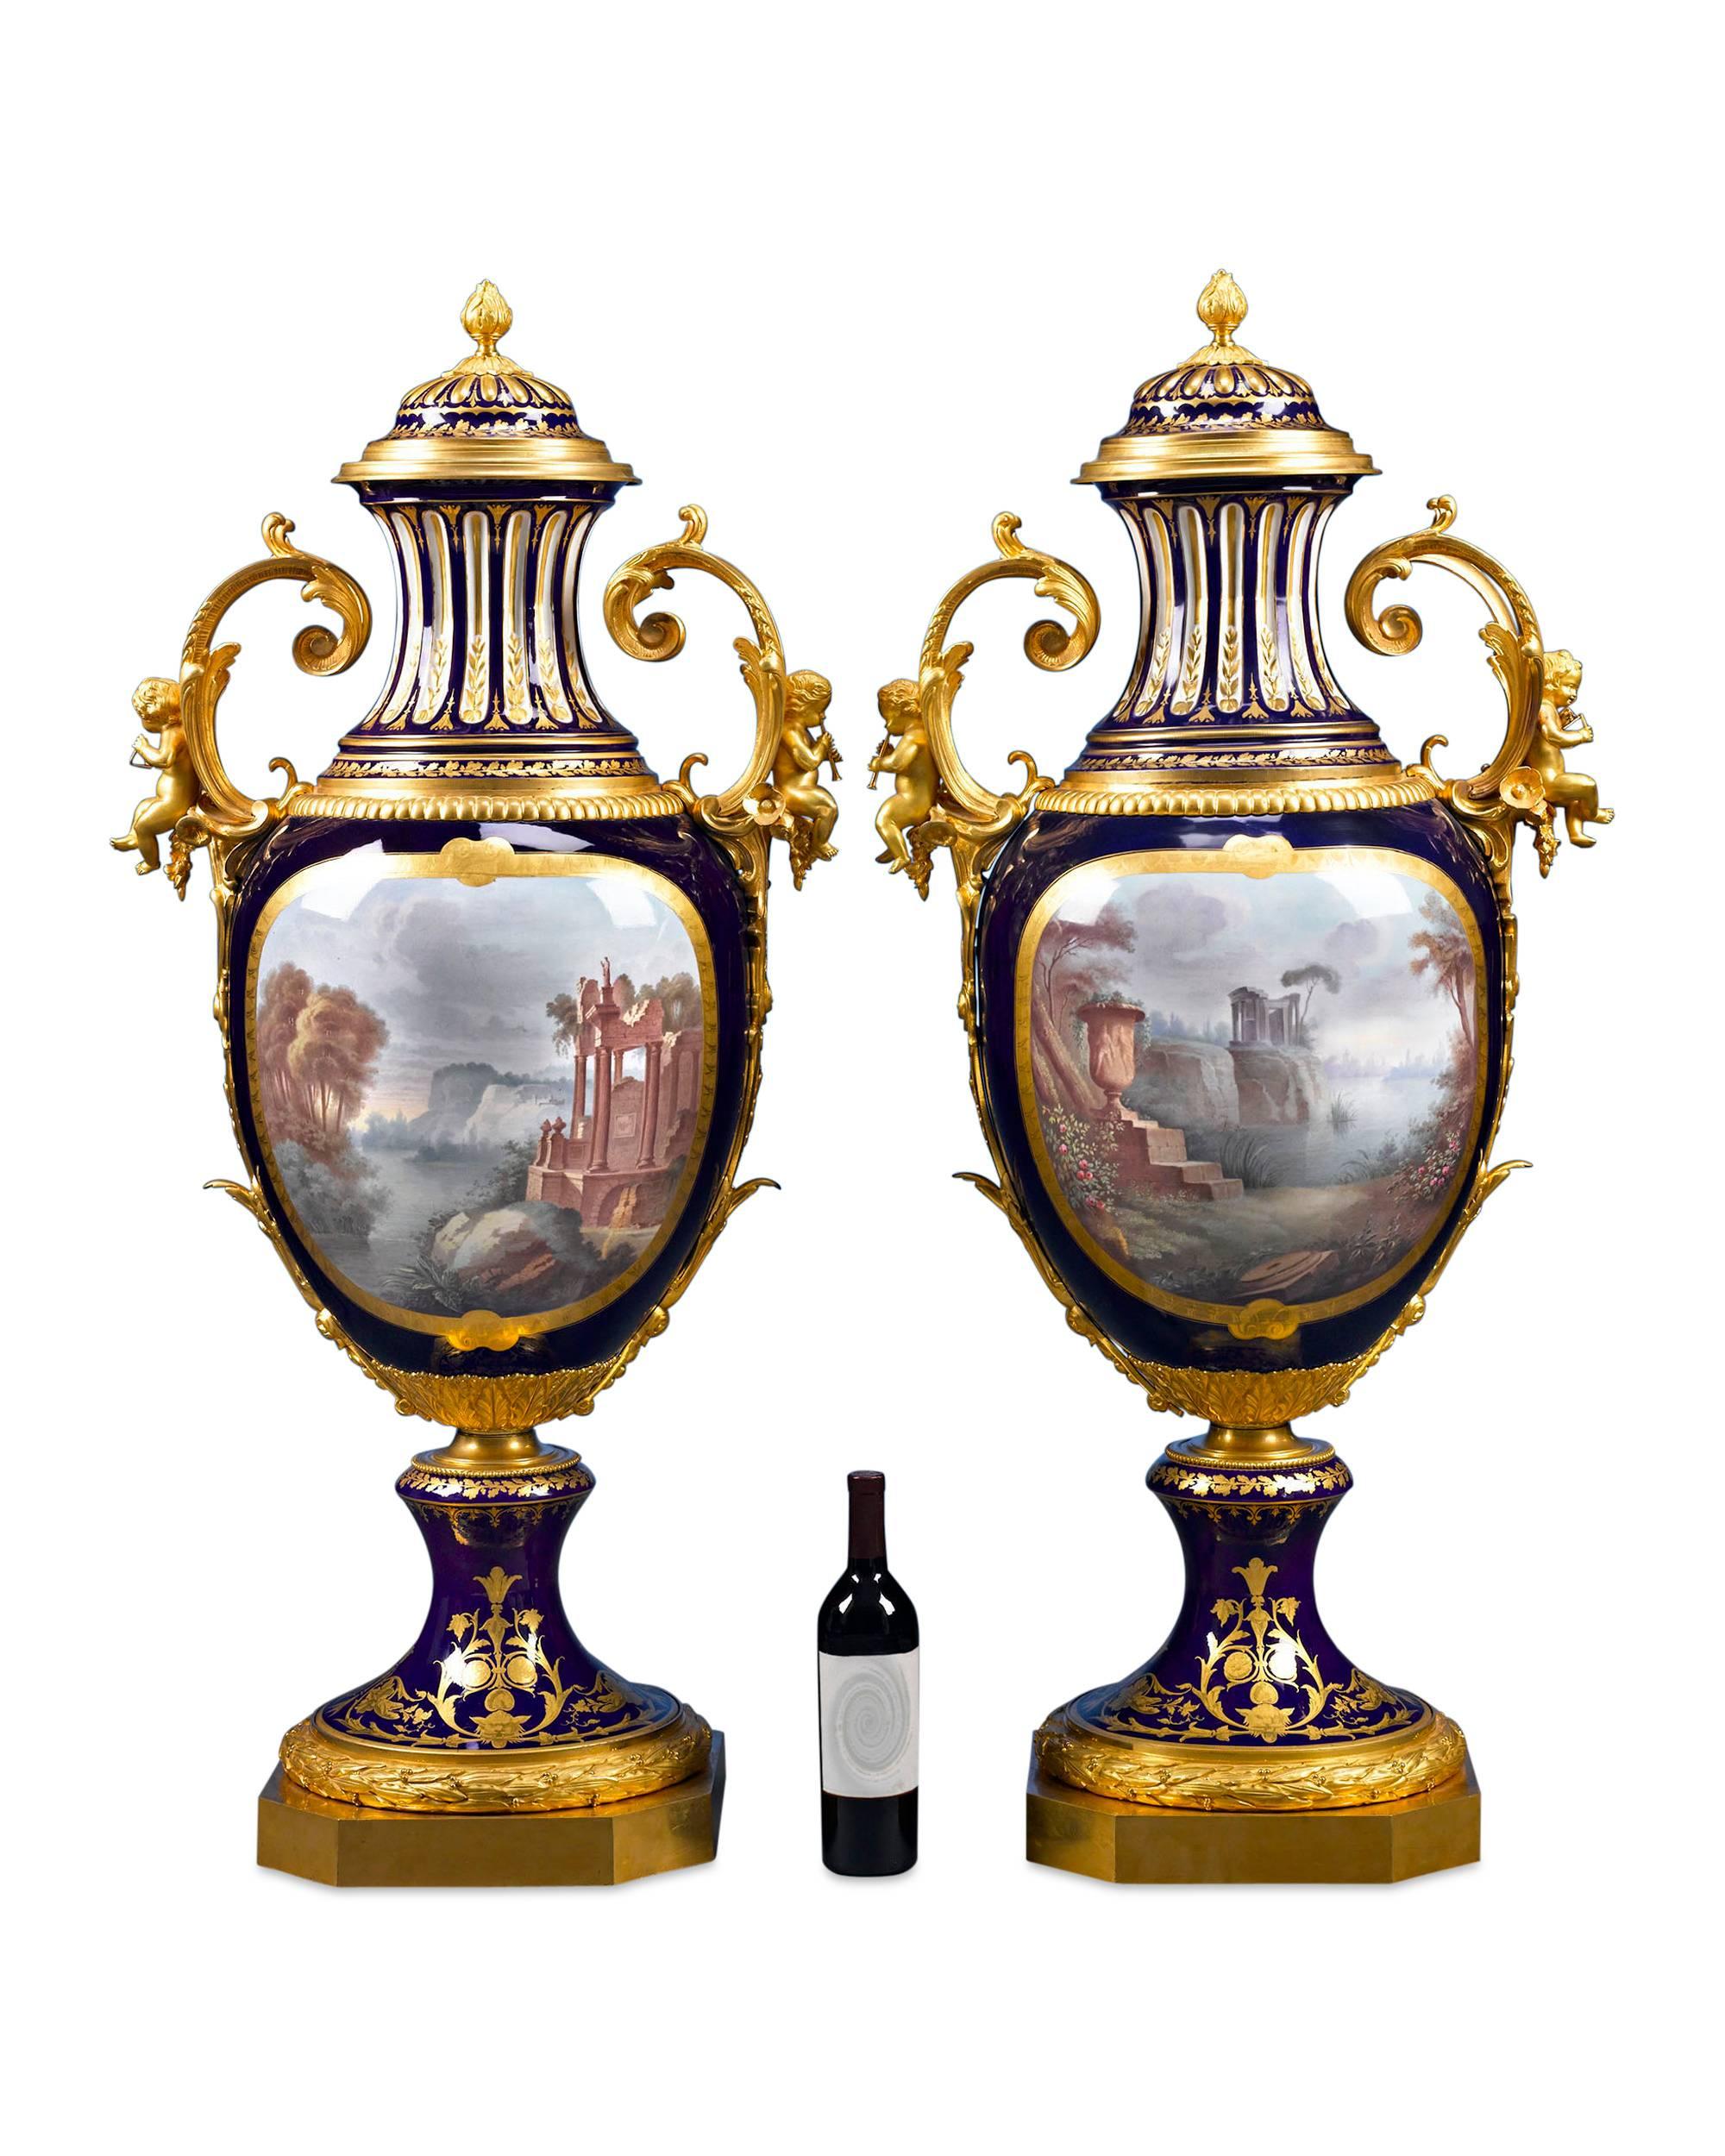 These bronze-mounted Sèvres porcelain urns are monumental in both size and quality and feature the renowned manufactory’s signature deep cobalt blue glaze. Sèvres urns were made in various sizes and qualities over the years, with the finest examples